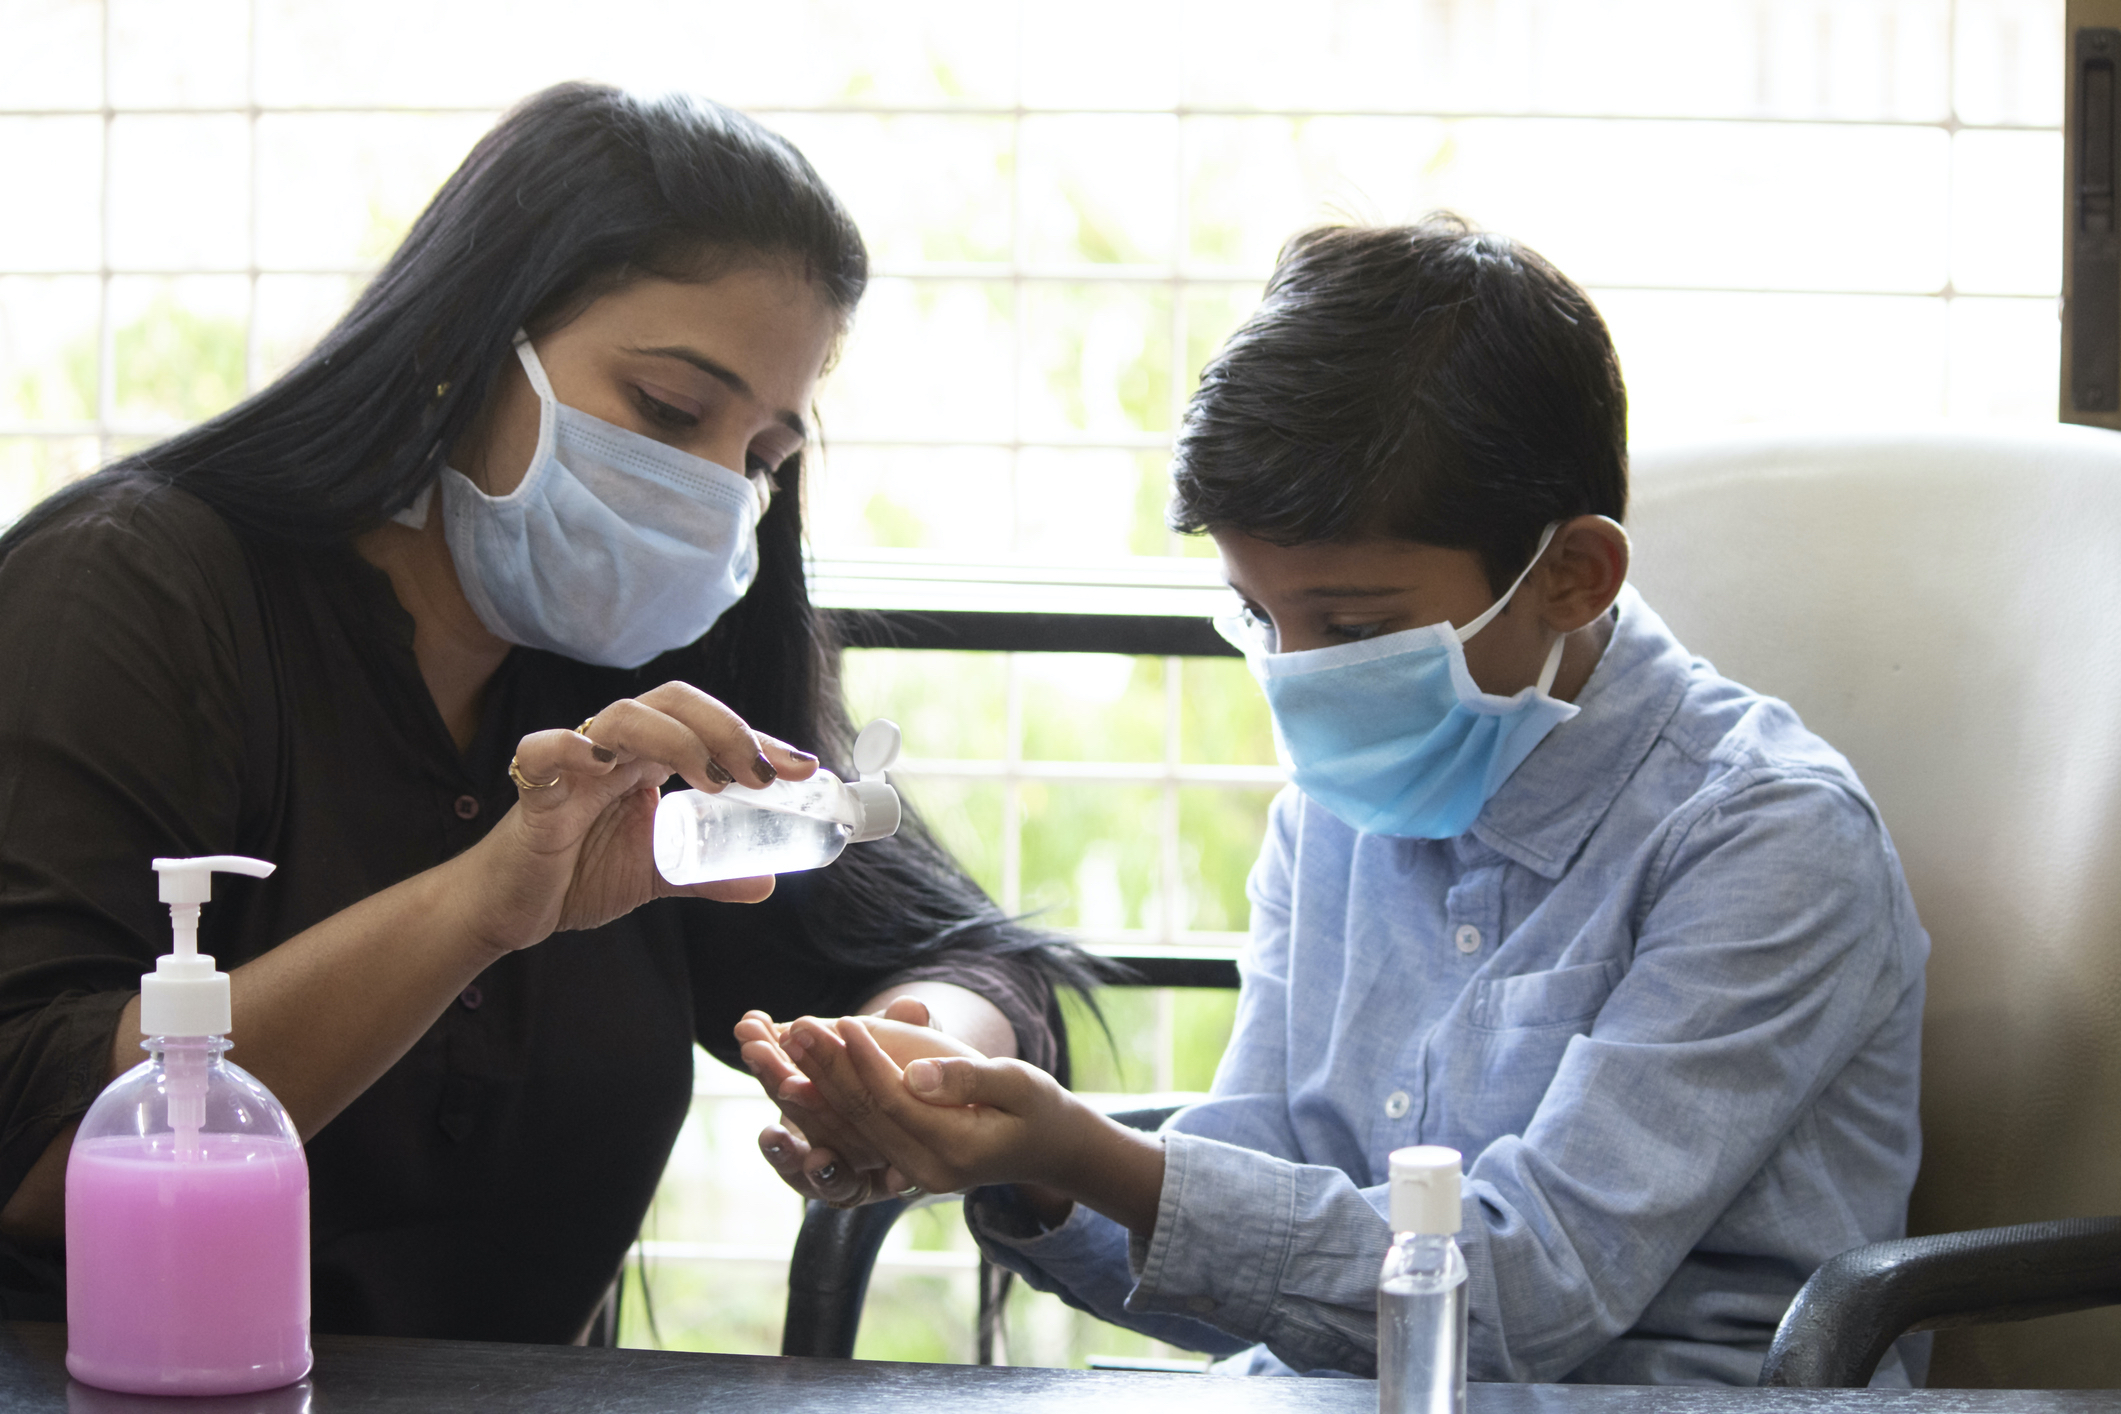 A person in a face mask giving hand sanitizer to a child also wearing a face mask.